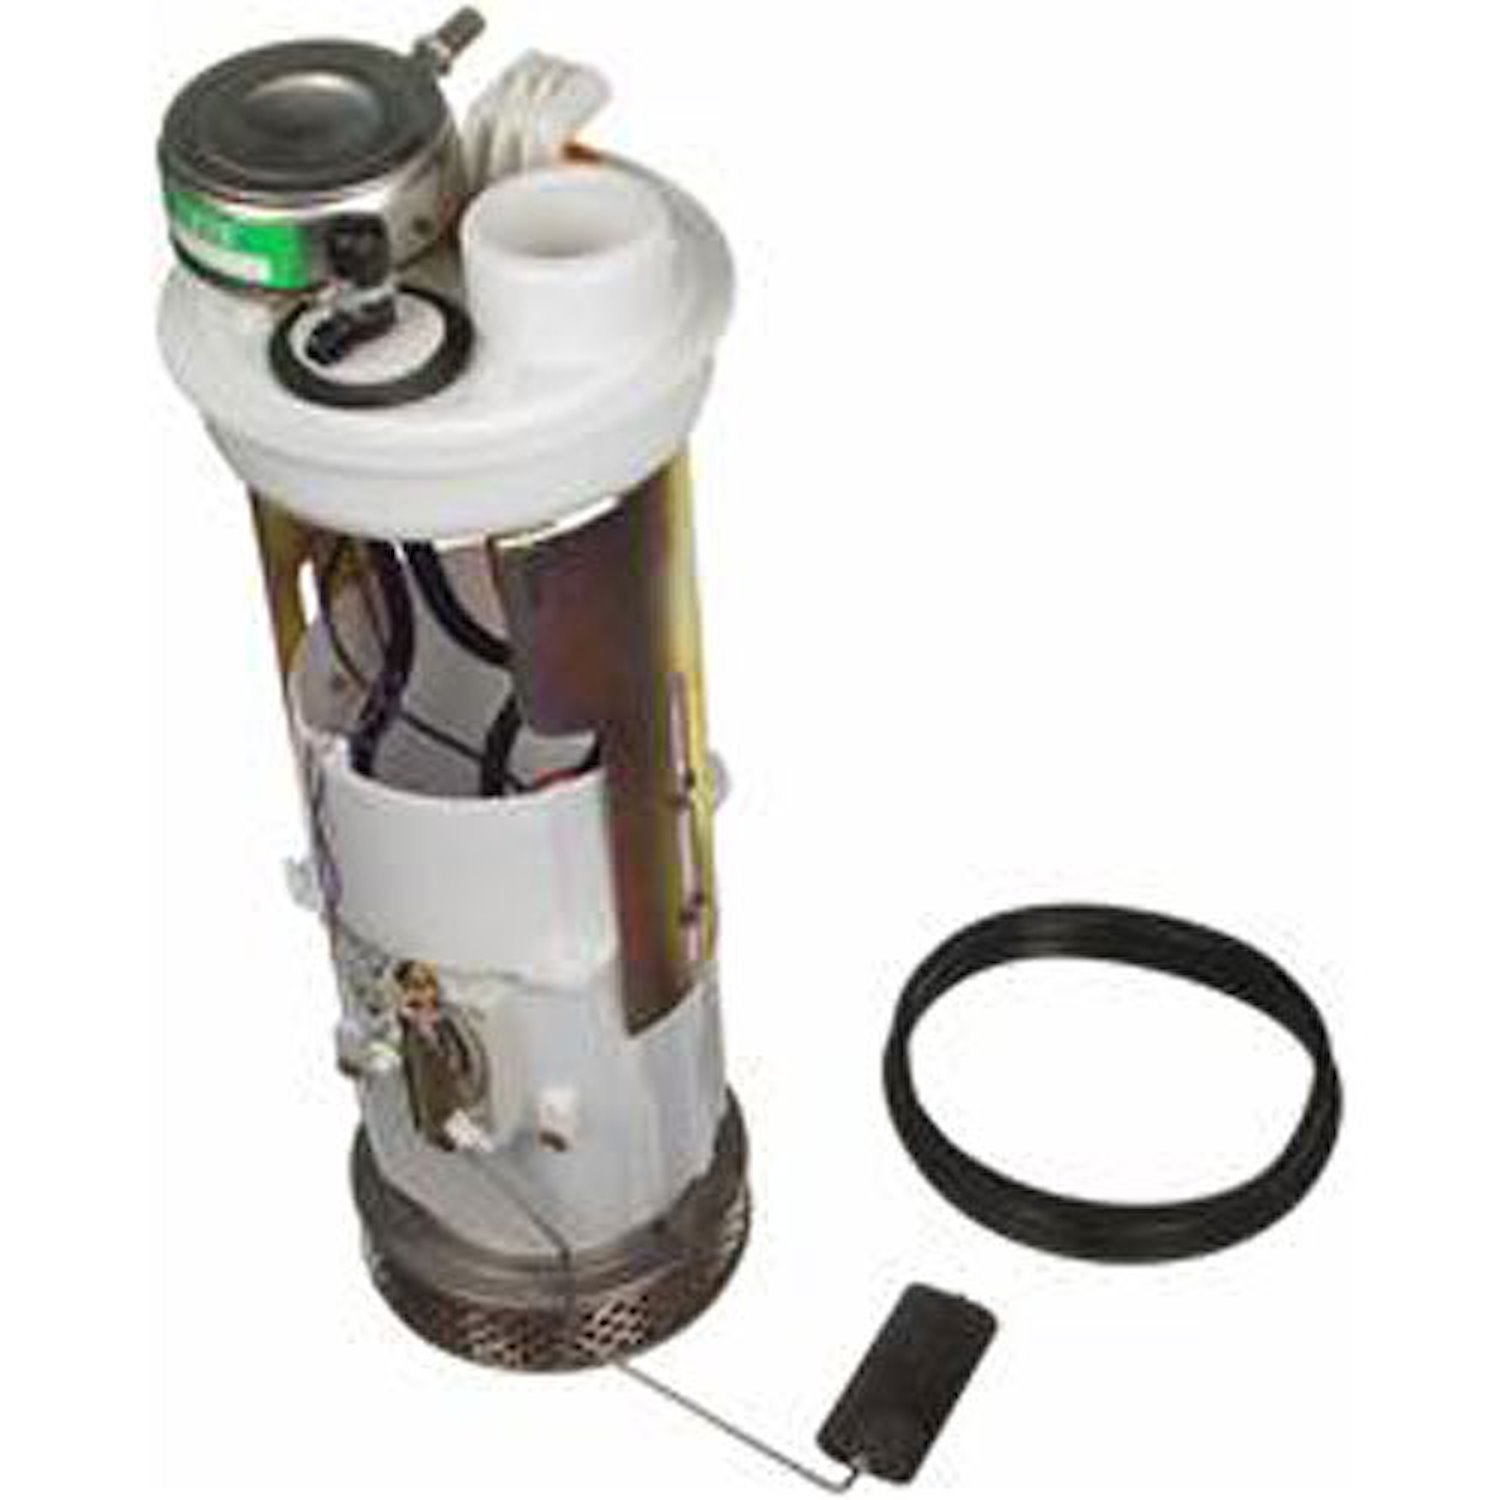 OE Chrysler/Dodge Replacement Electric Fuel Pump Module Assembly for 1994-1995 Dodge Ram